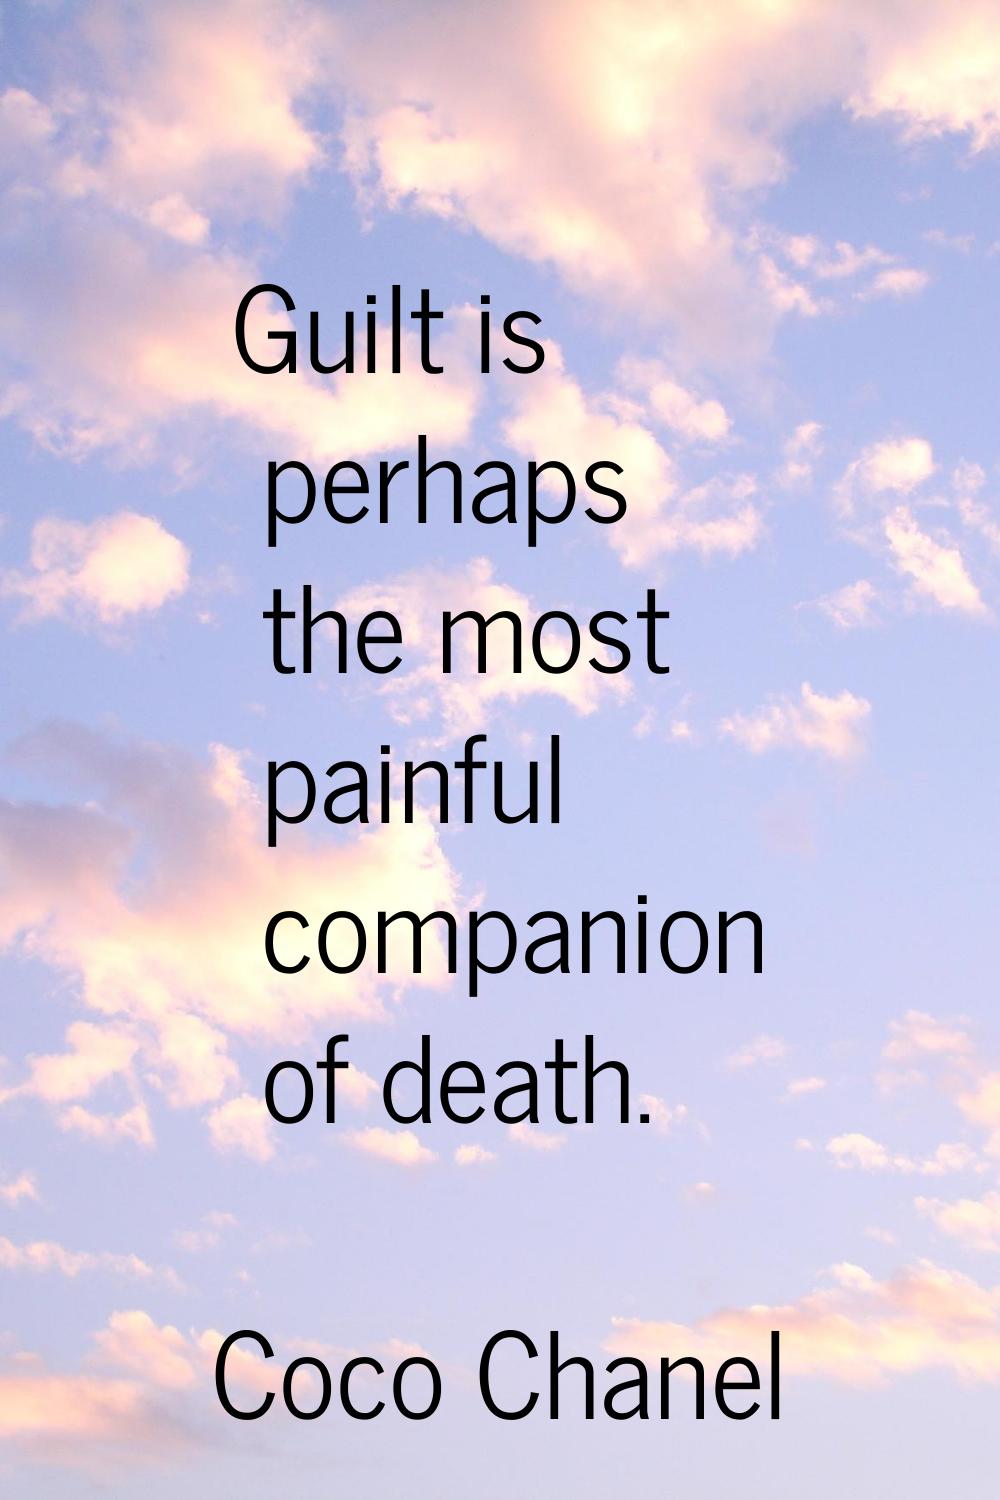 Guilt is perhaps the most painful companion of death.